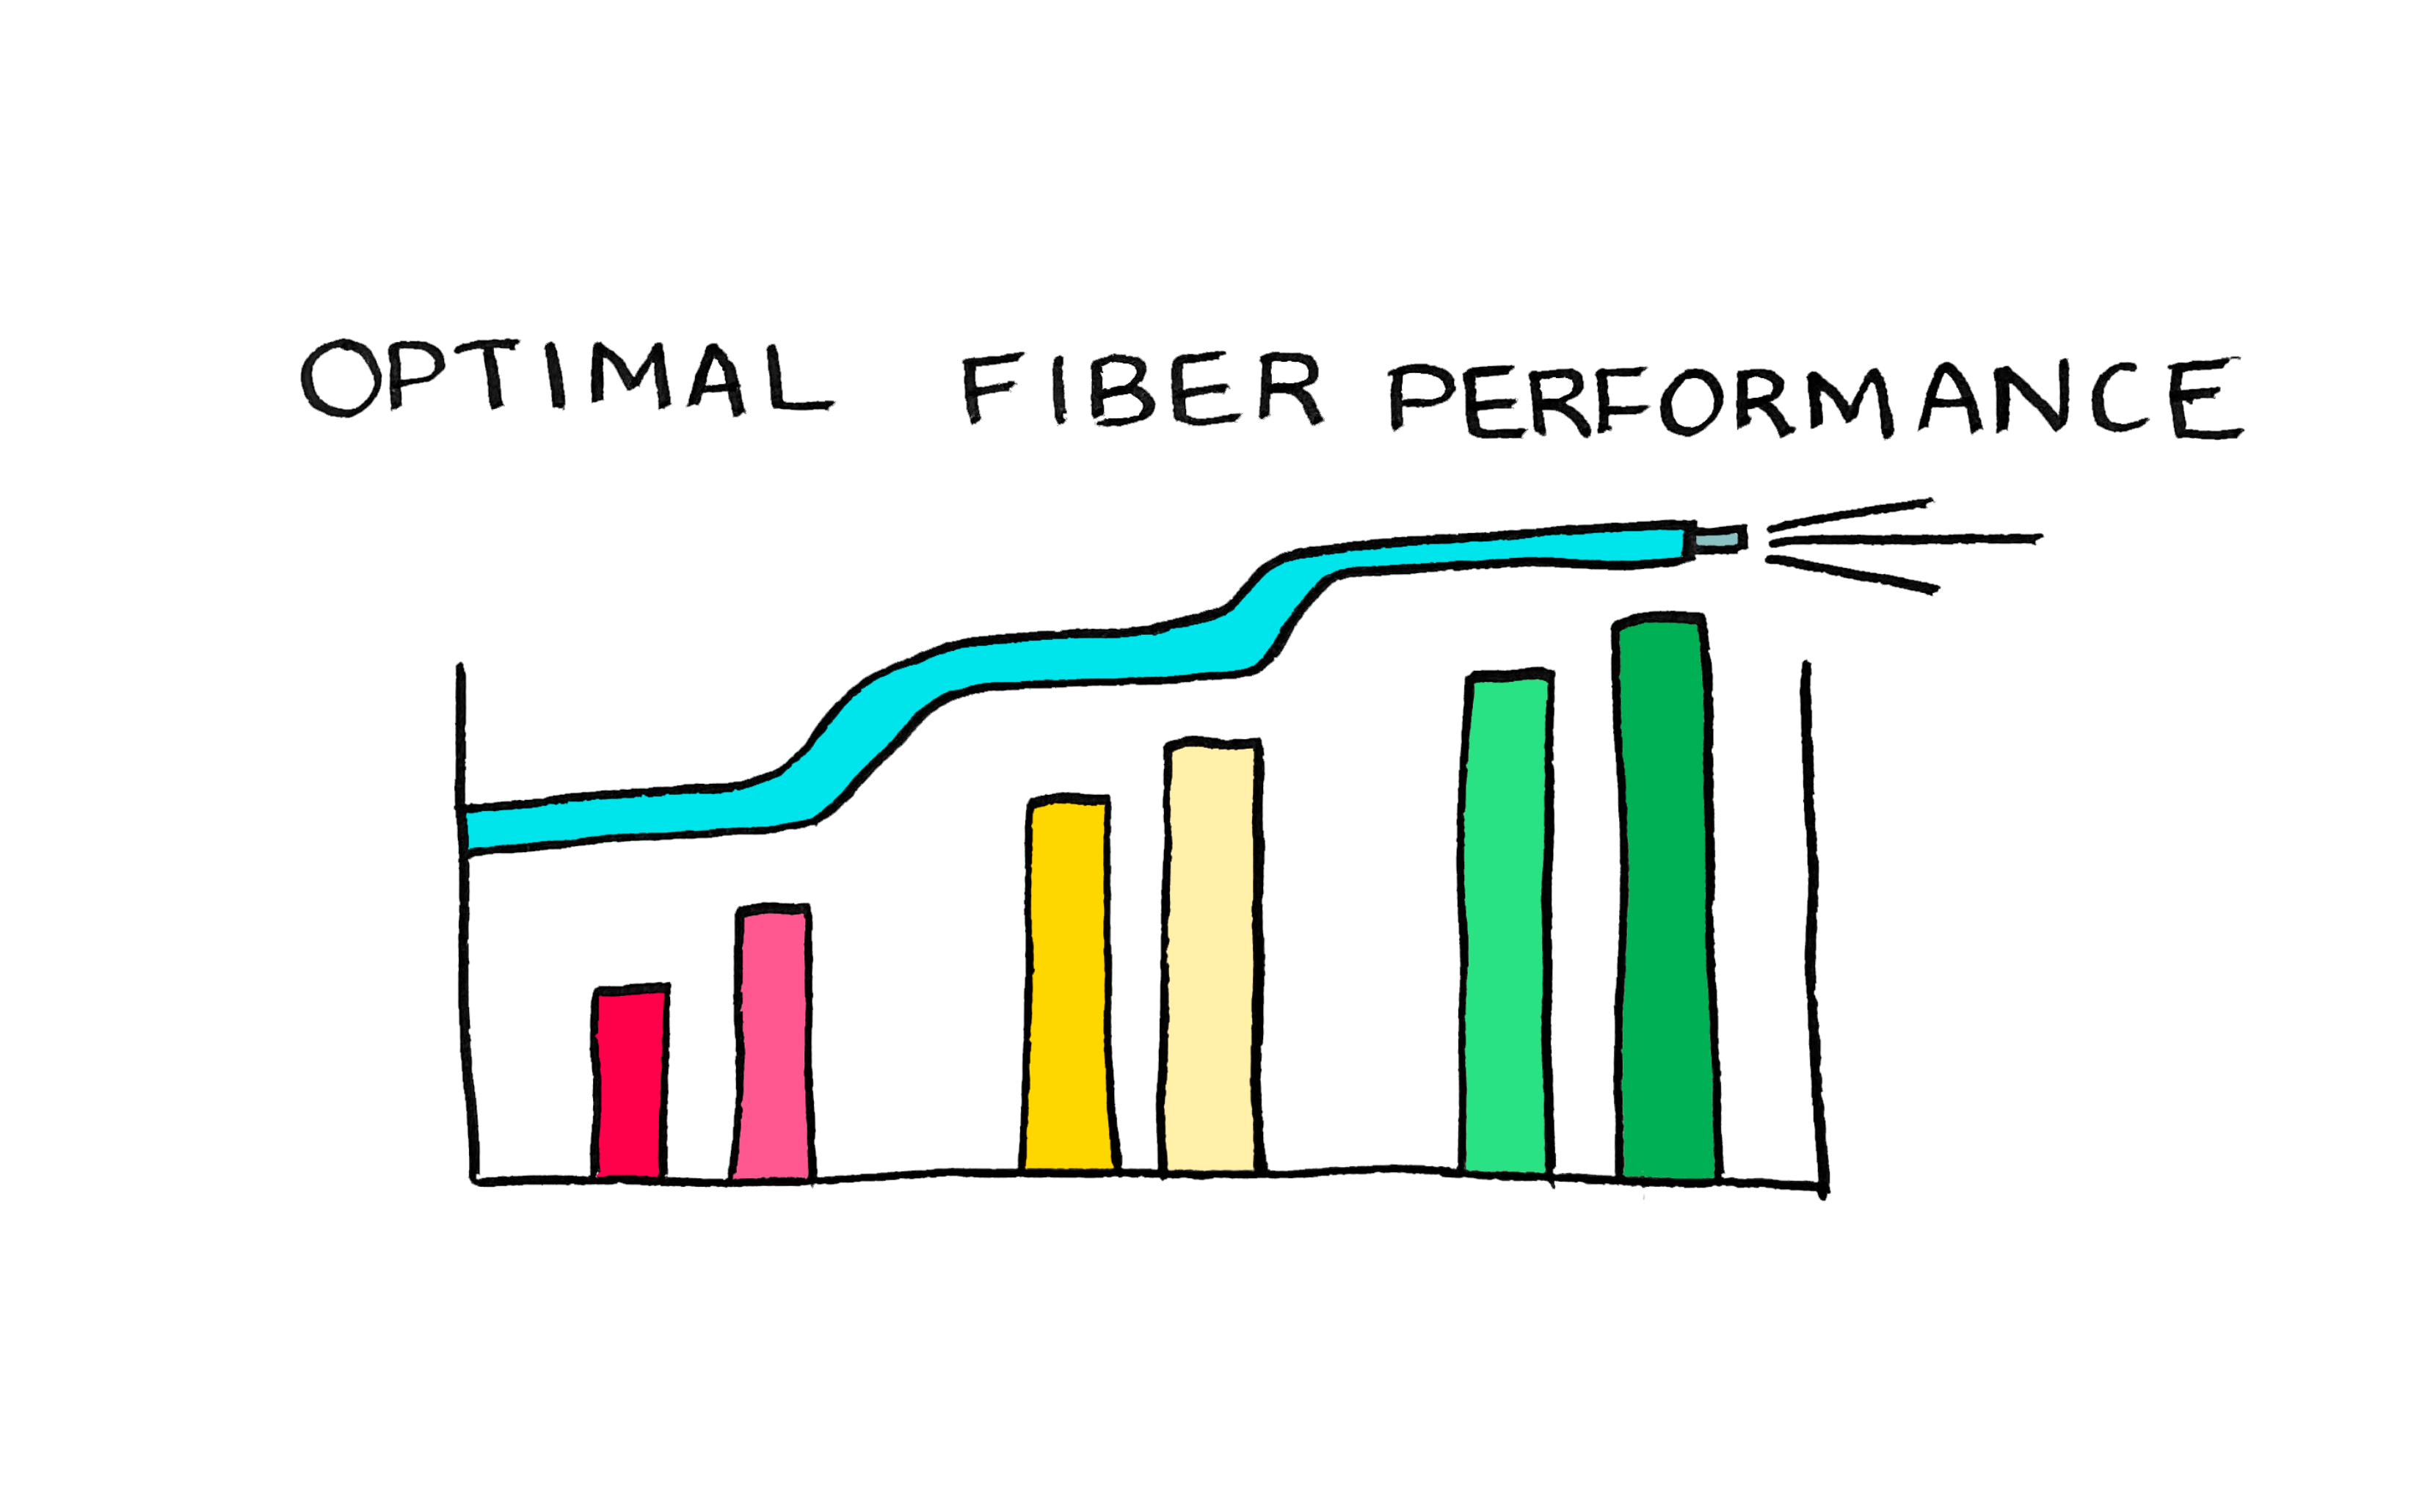 Optimal Fiber Performance Starts with Clean Fiber Connections